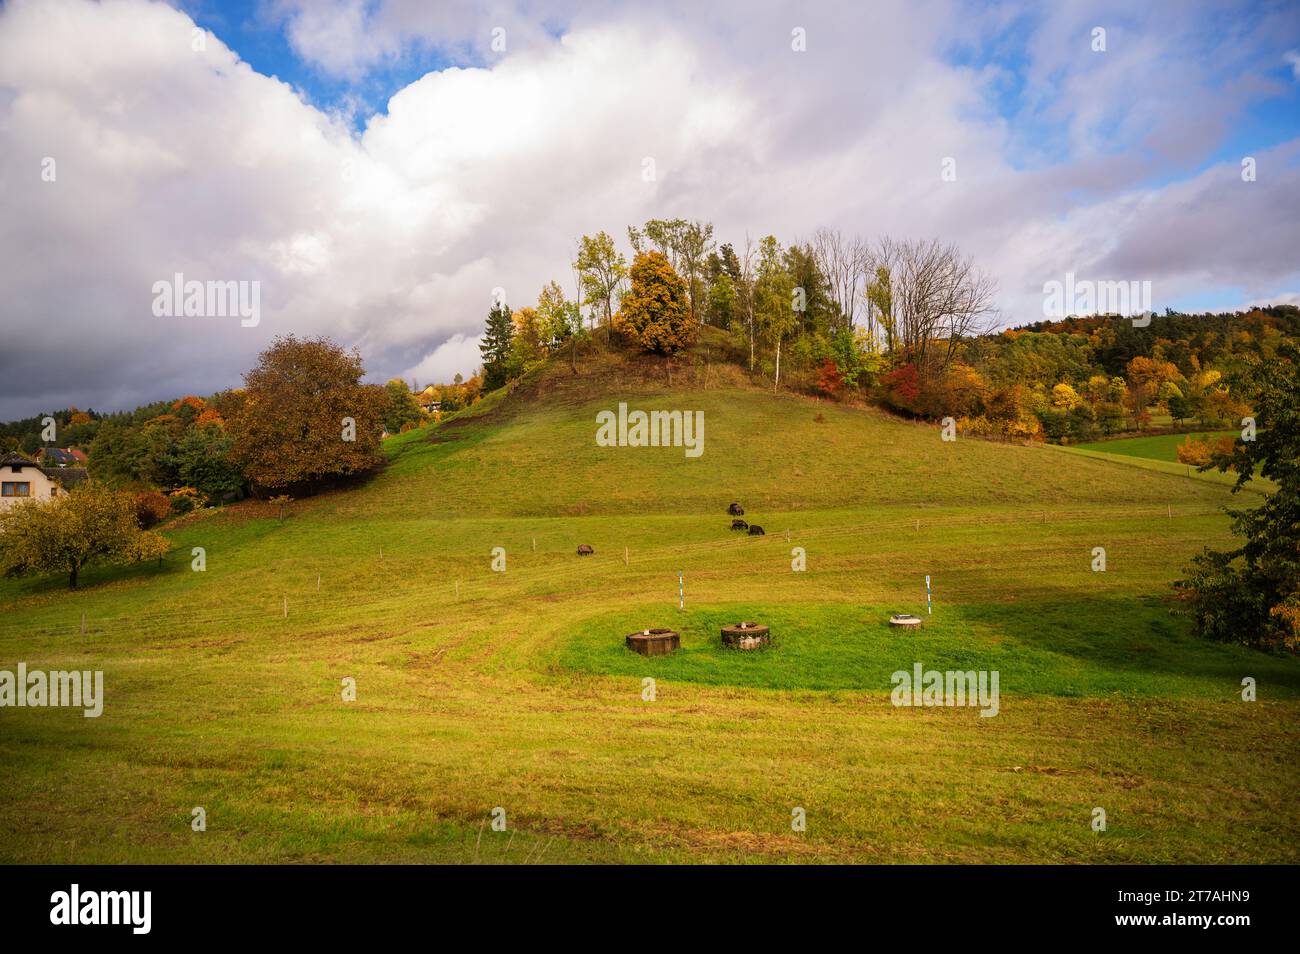 Devil's hill, morphologically conspicuous cone, extinct volcano with meadow and trree in autumn day. Koberovy, Czech Paradise, Czech republic. Stock Photo